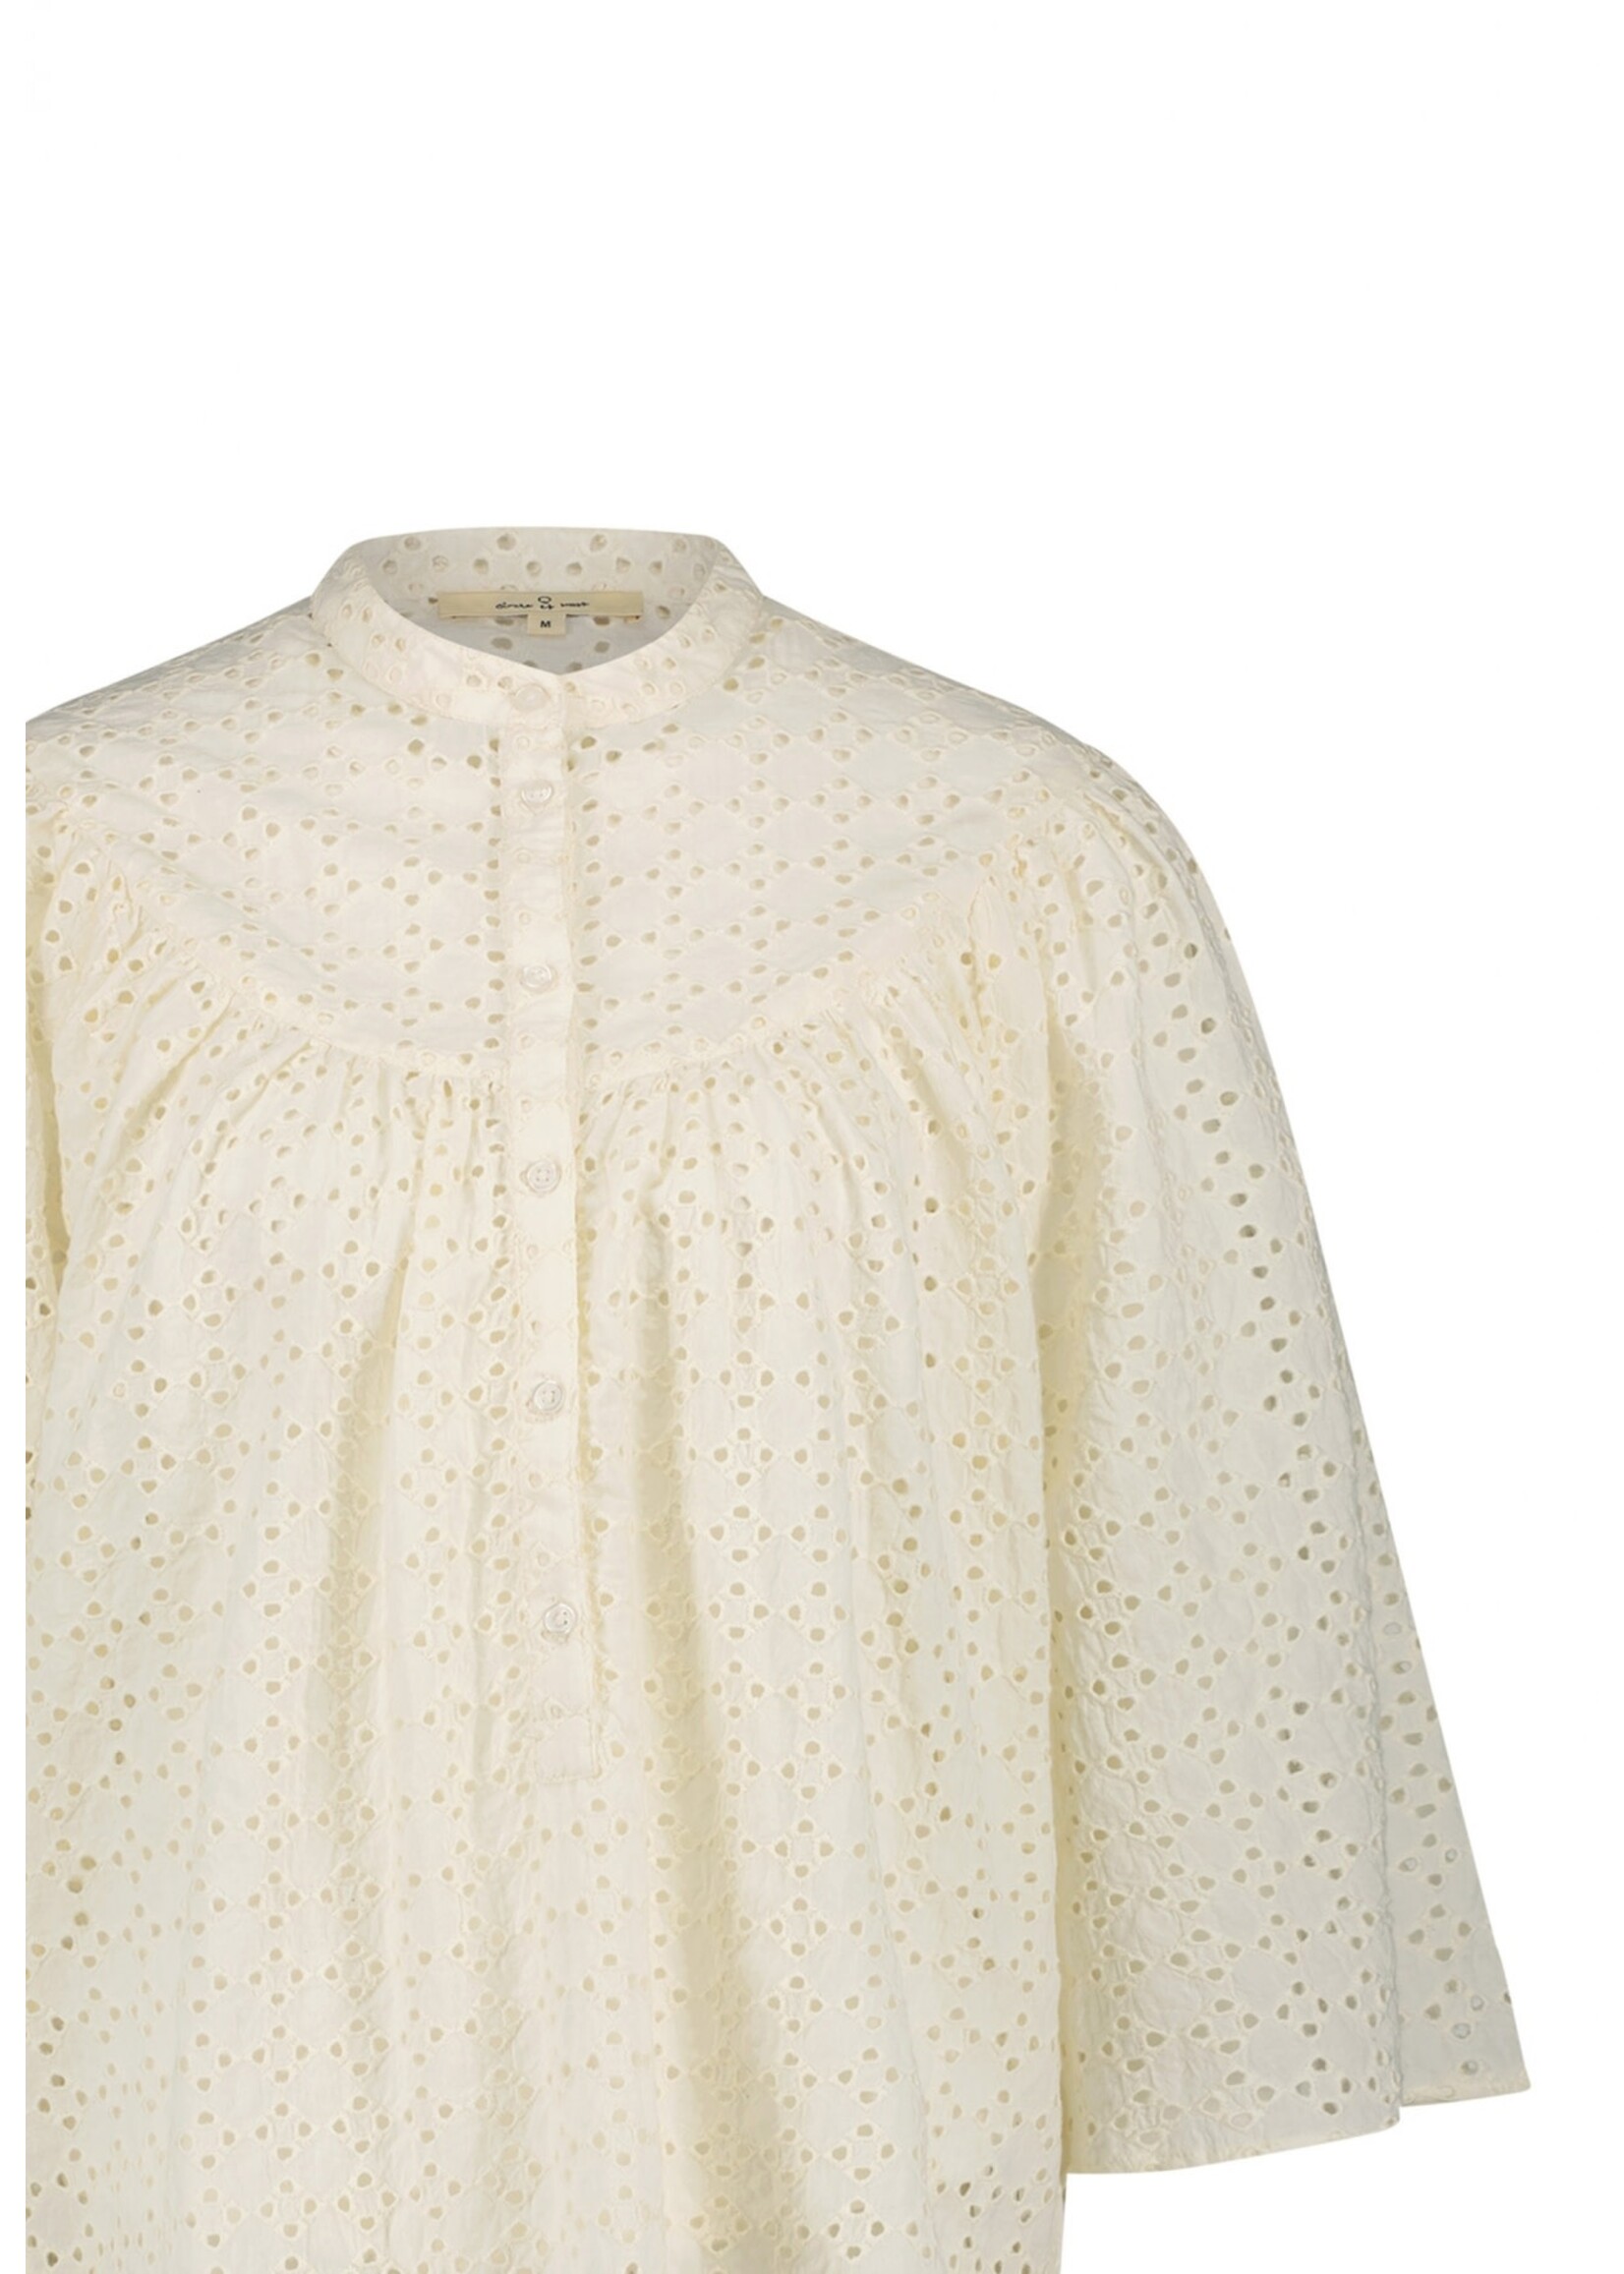 CIRCLE OF TRUST MERLIN BLOUSE antique white